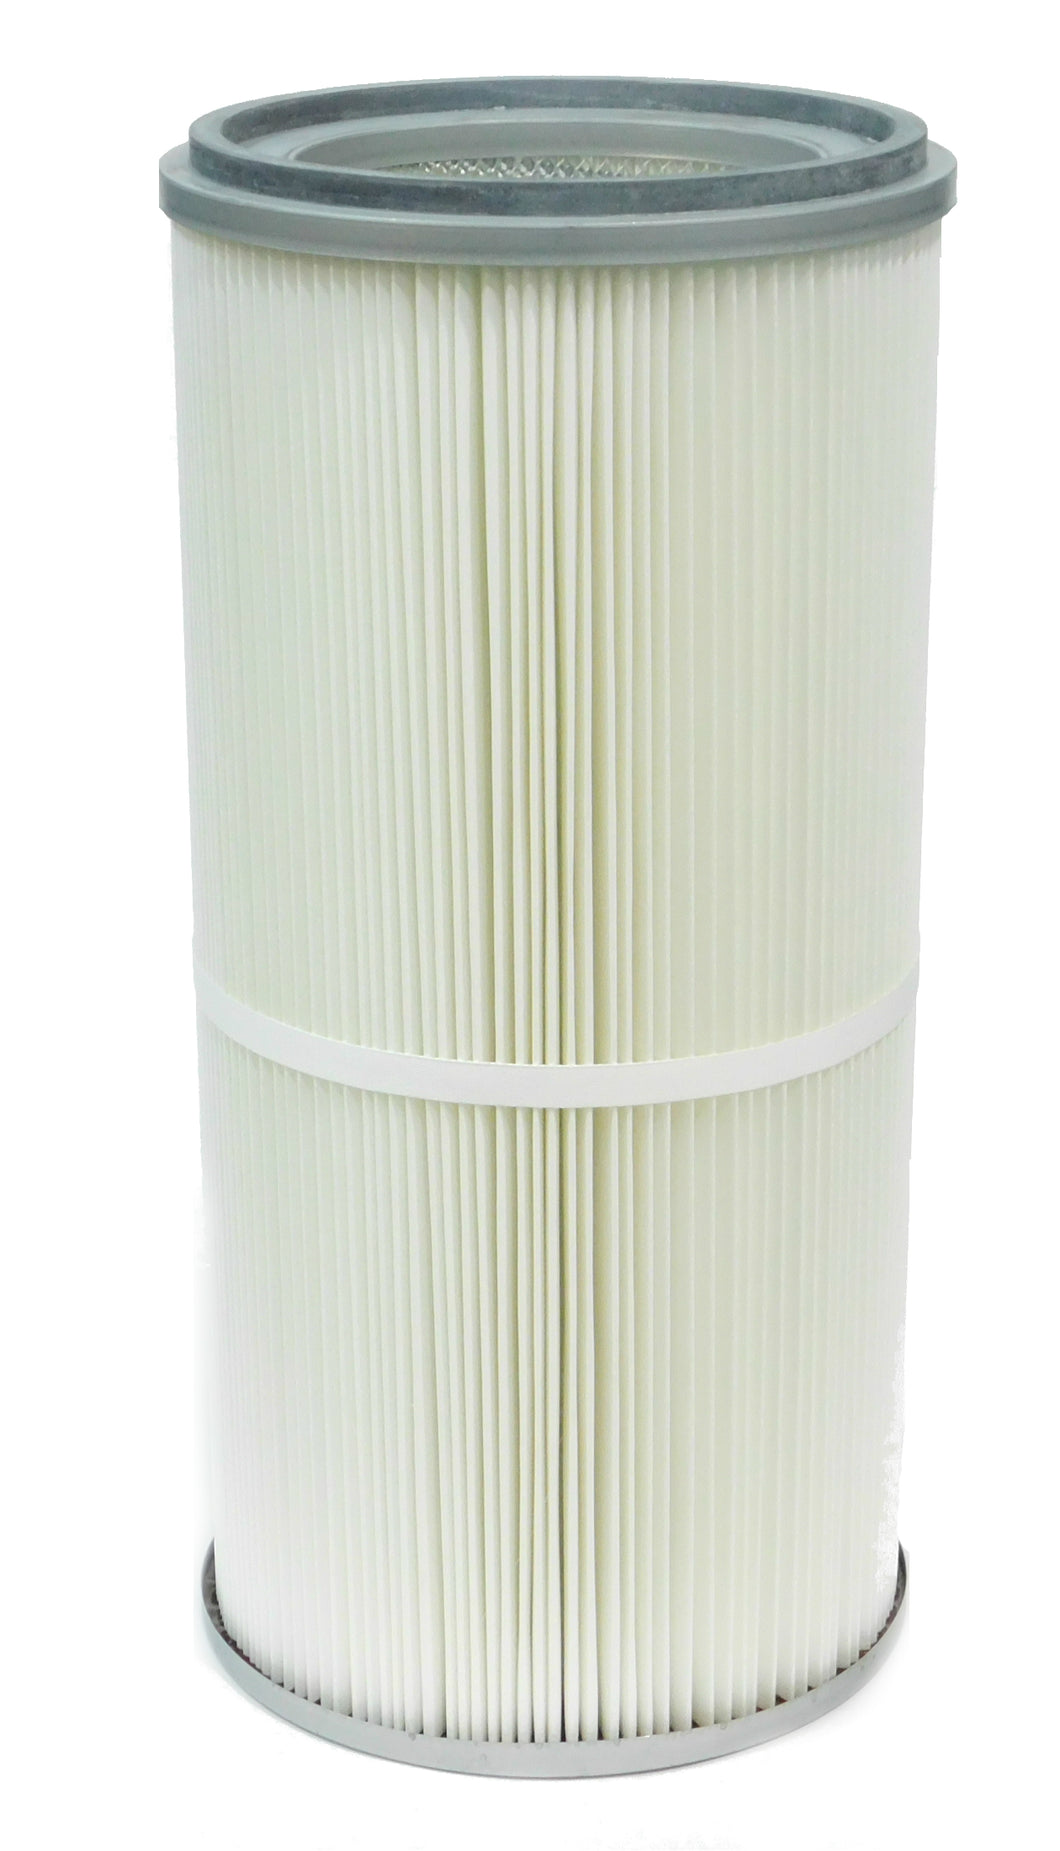 p031792 - Donaldson - OEM Replacement Filter